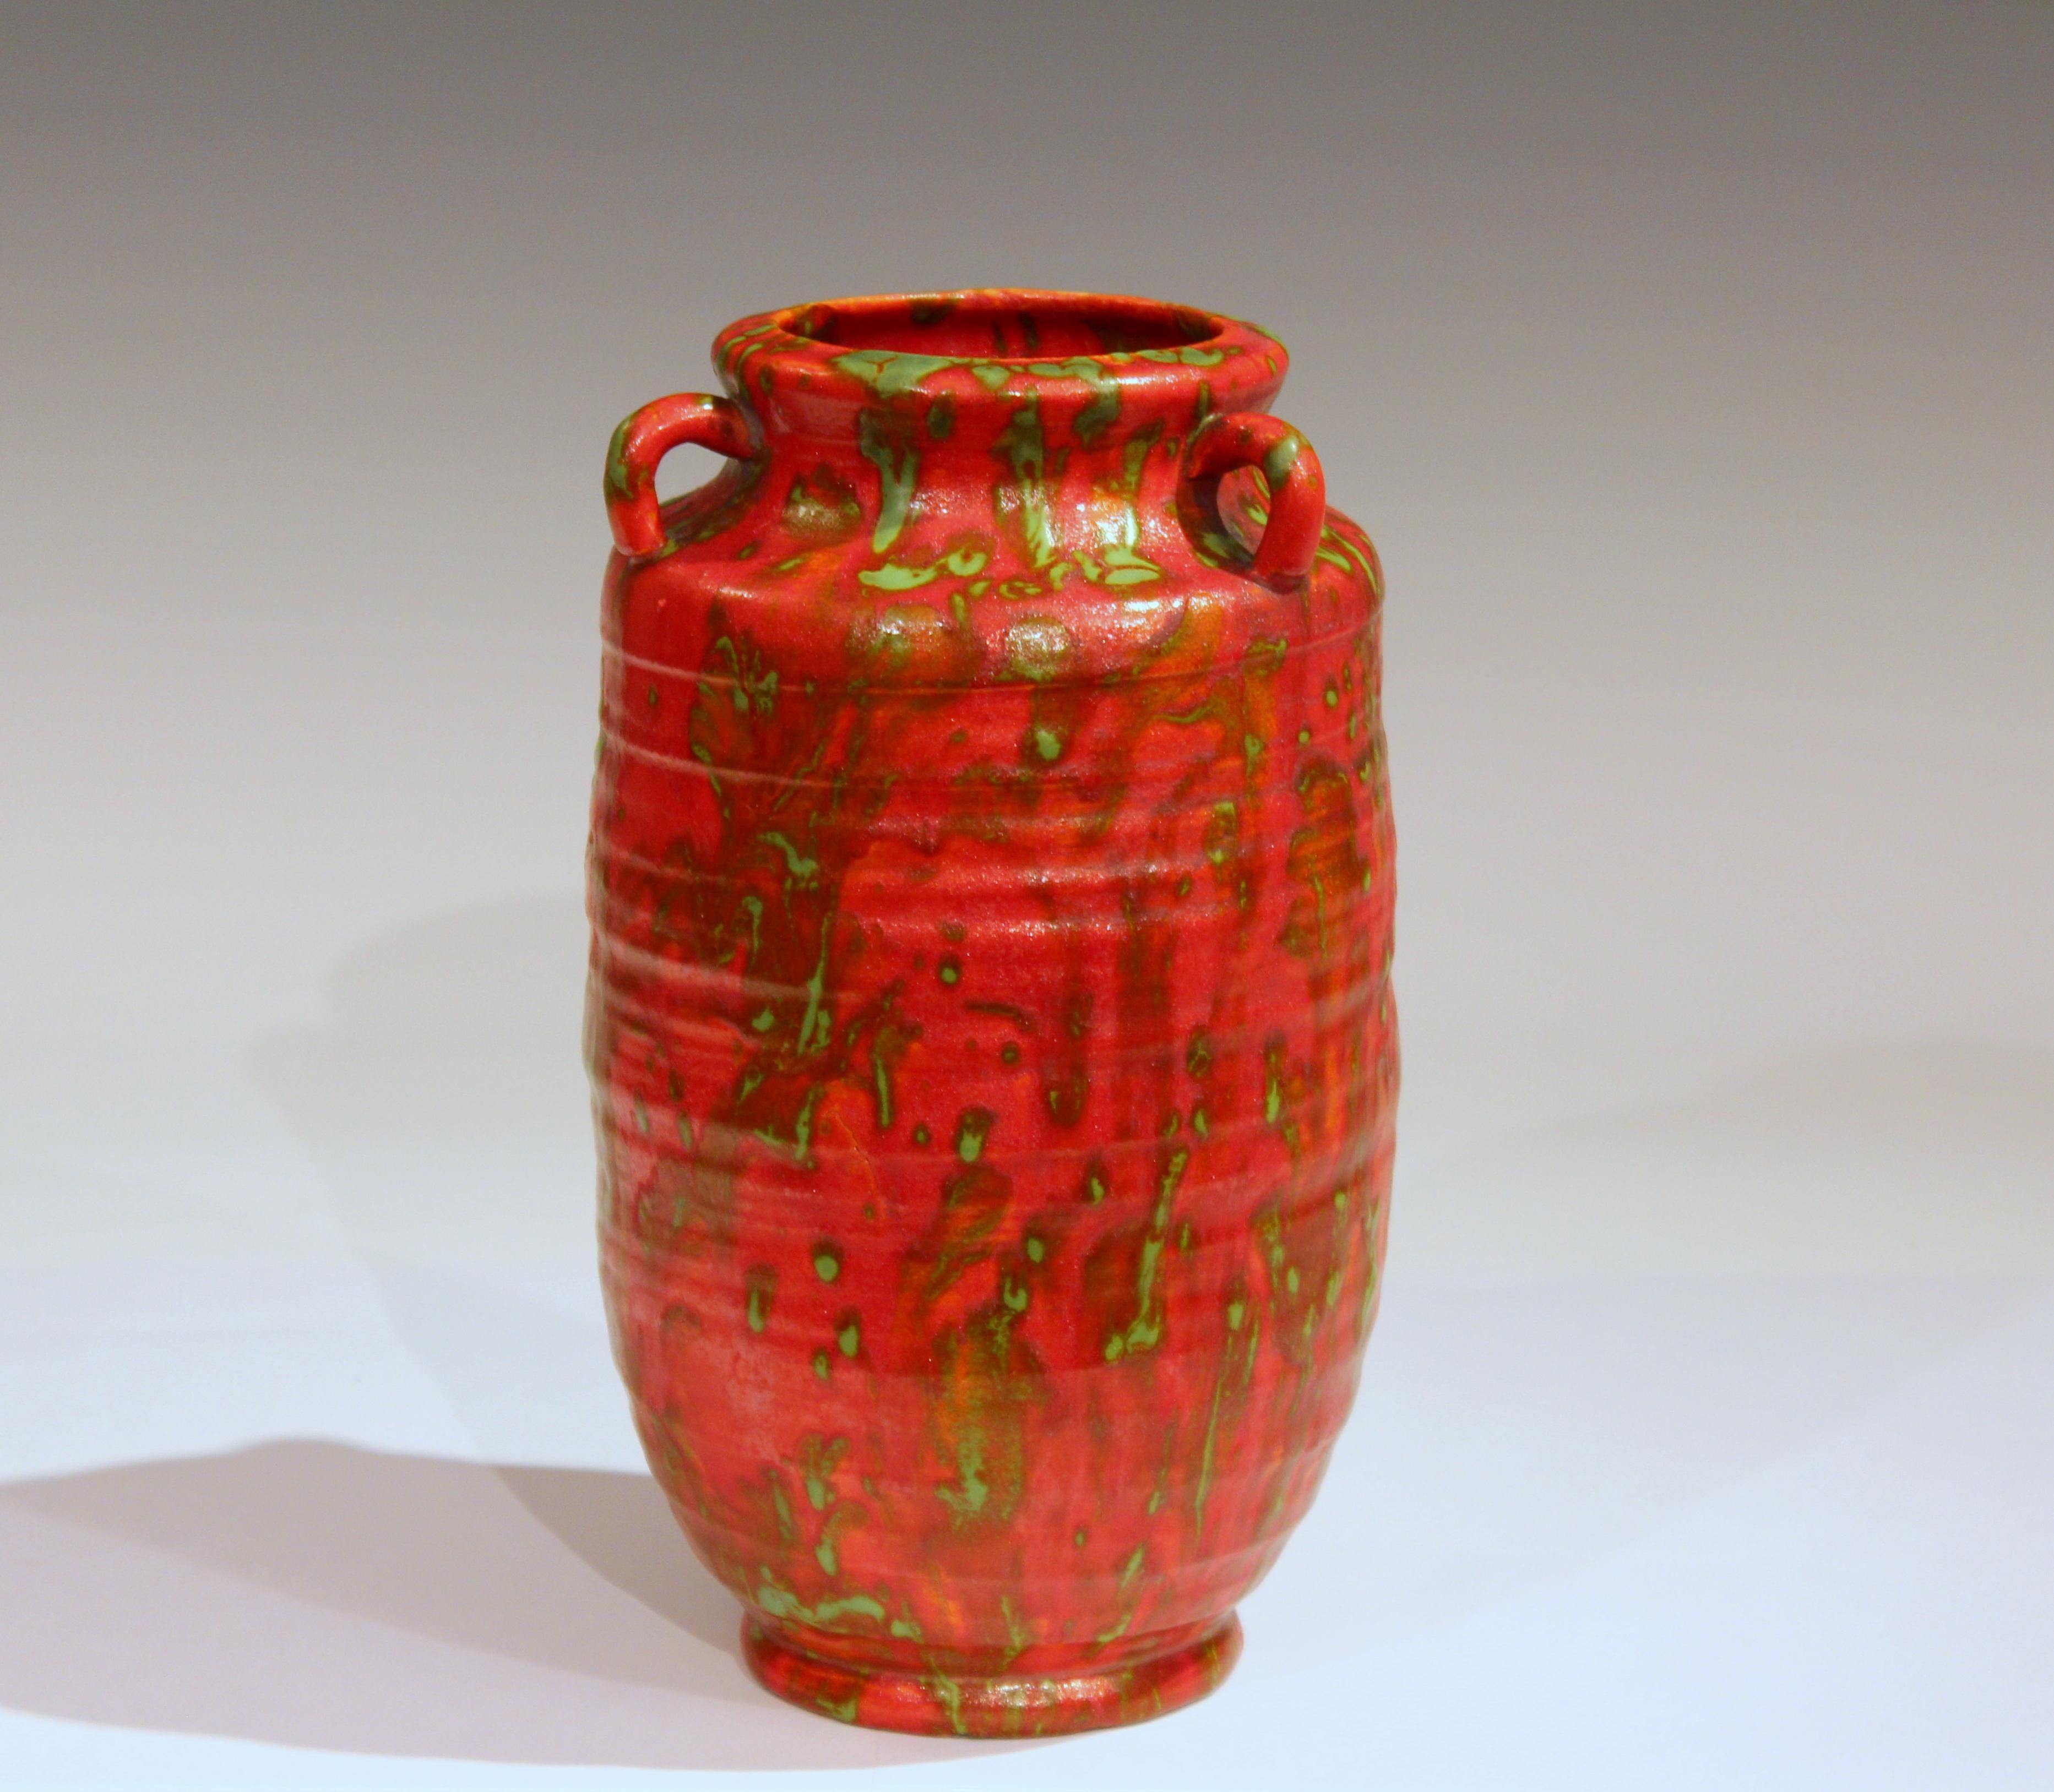 Awaji pottery Art Deco vase in chrome red hot lava glaze interspersed with rivulets of green, circa 1930s. Measures: 8 1/2